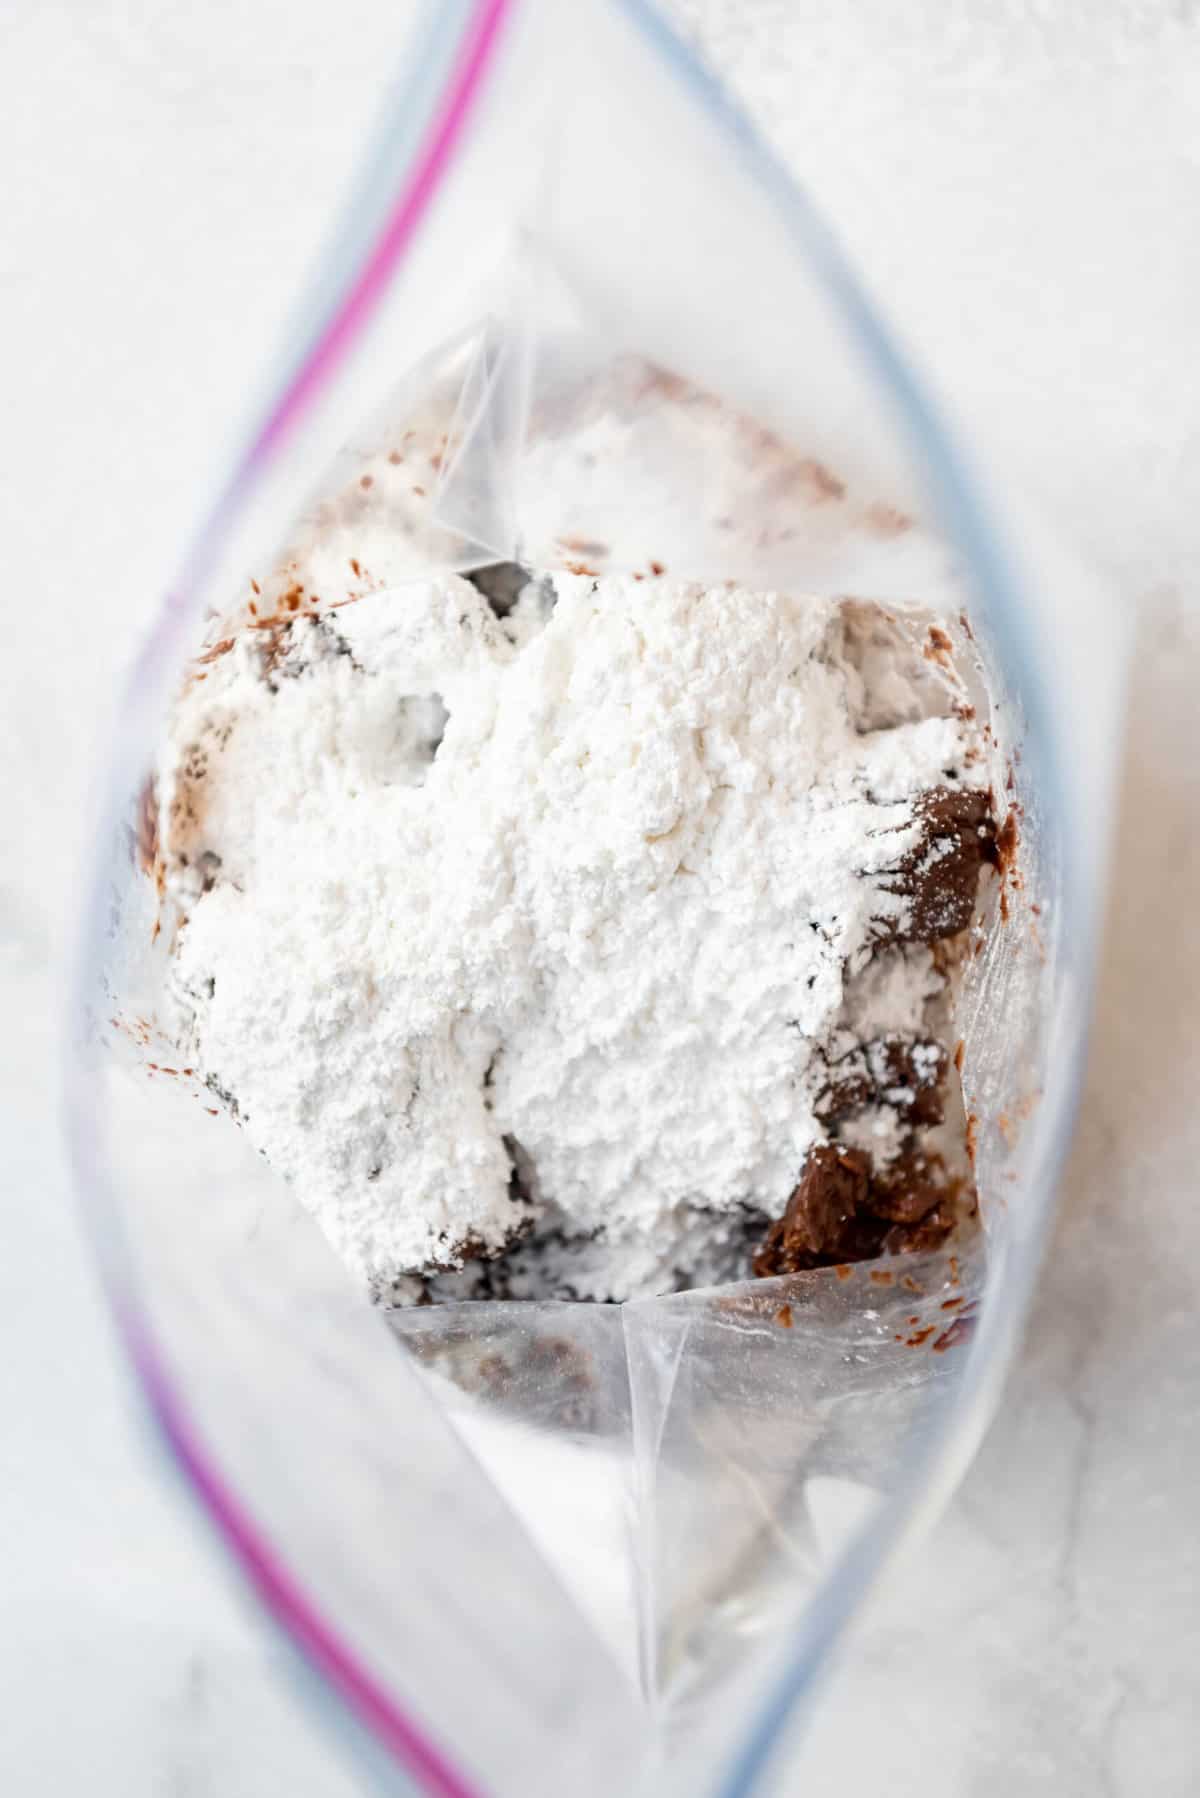 An image of powder sugar in a bag with chocolate and cereal for muddy buddies.